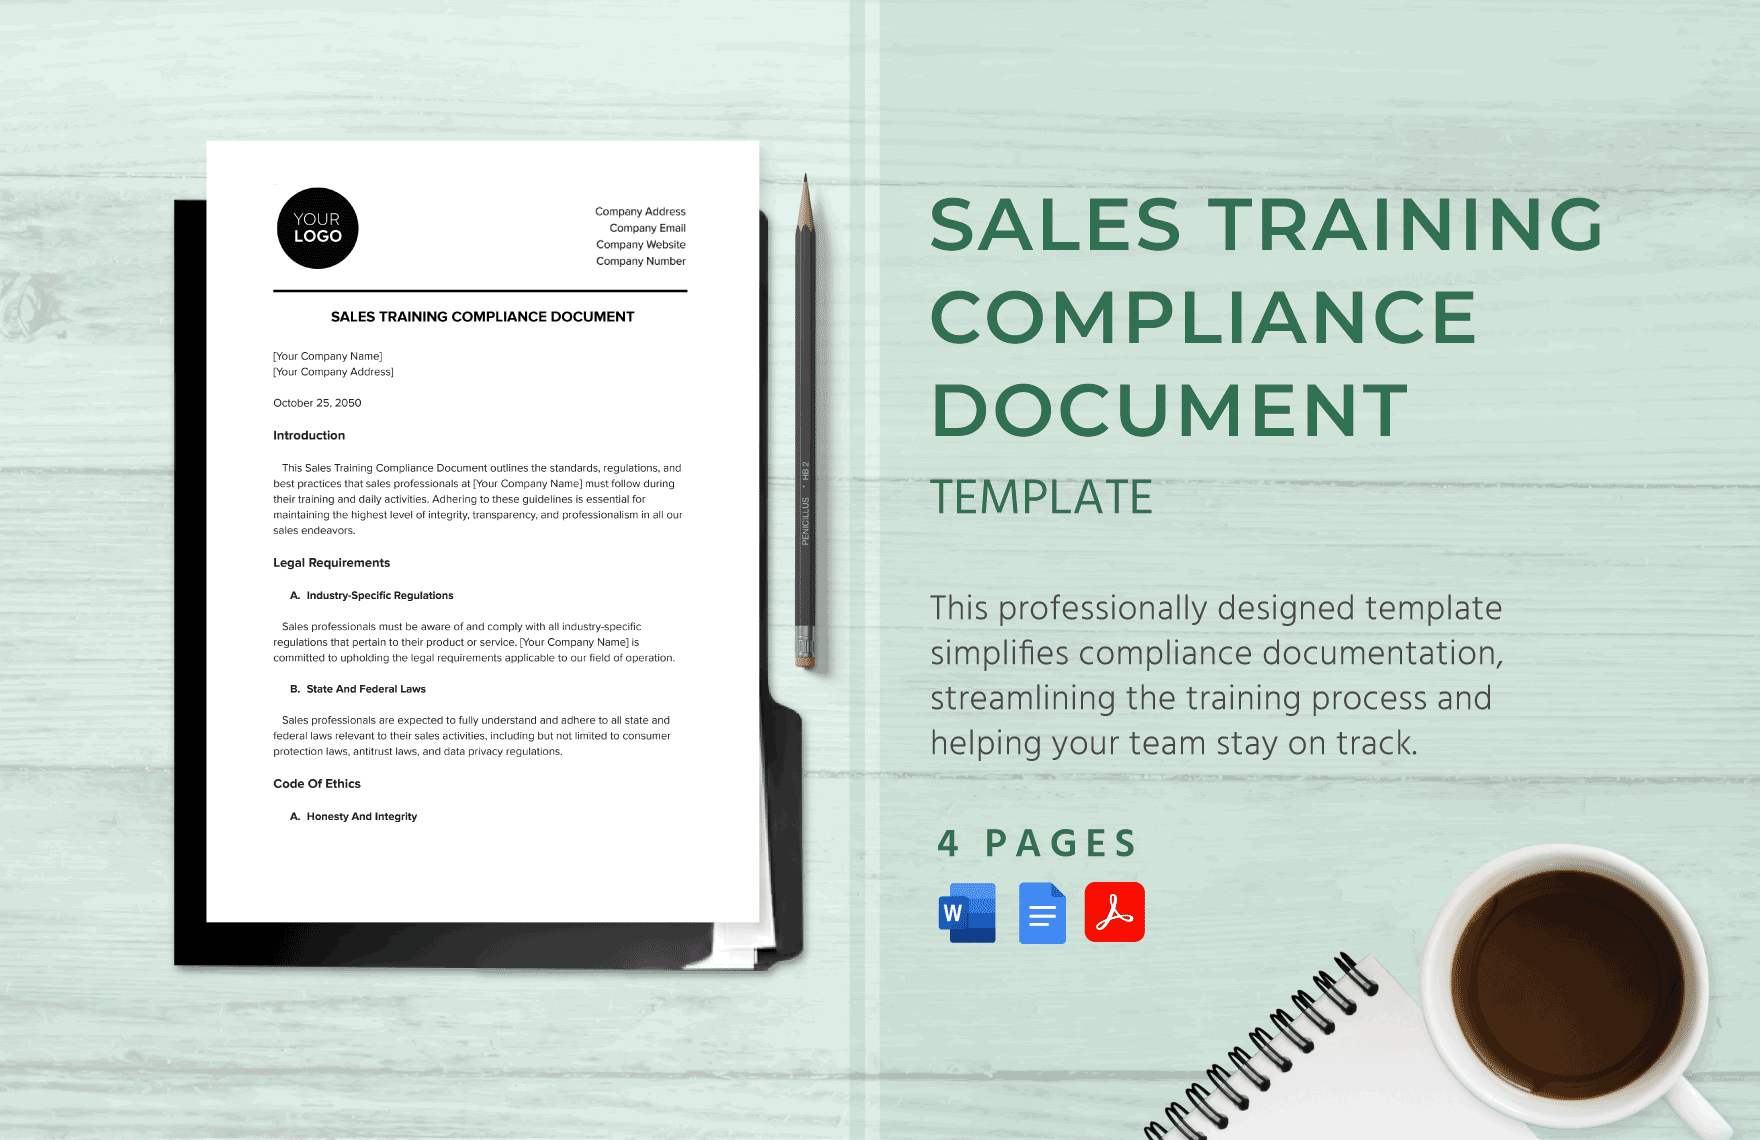 Sales Training Compliance Document Template in Word, Google Docs, PDF